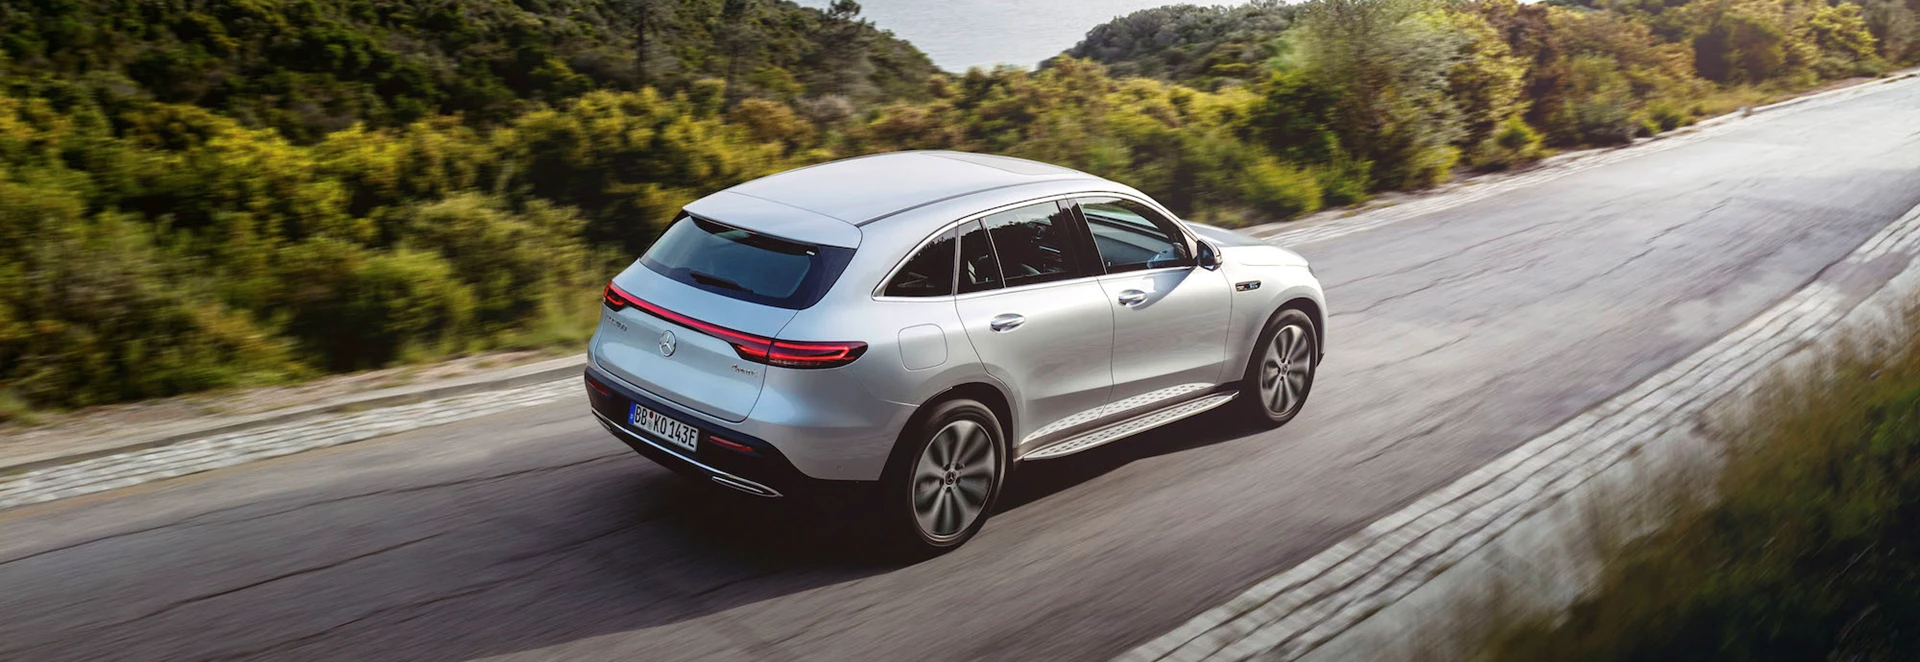 Prices Confirmed For New Electric Mercedes Benz Eqc Suv